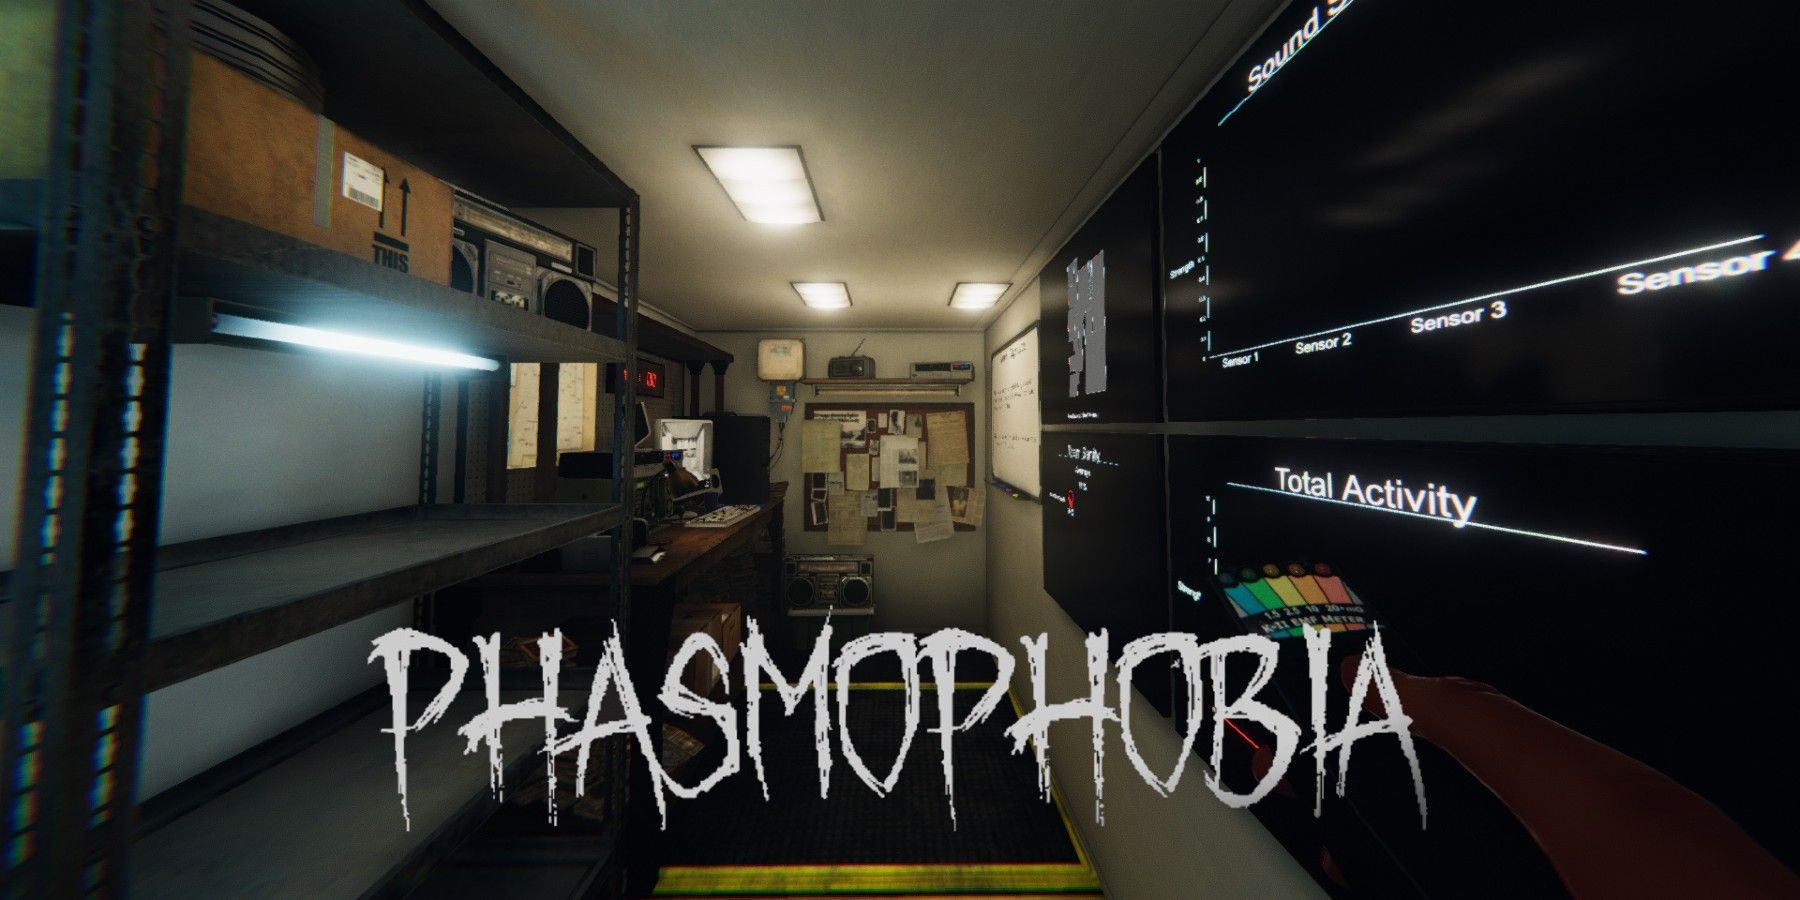 phasmophobia-truck-and-title-8969255